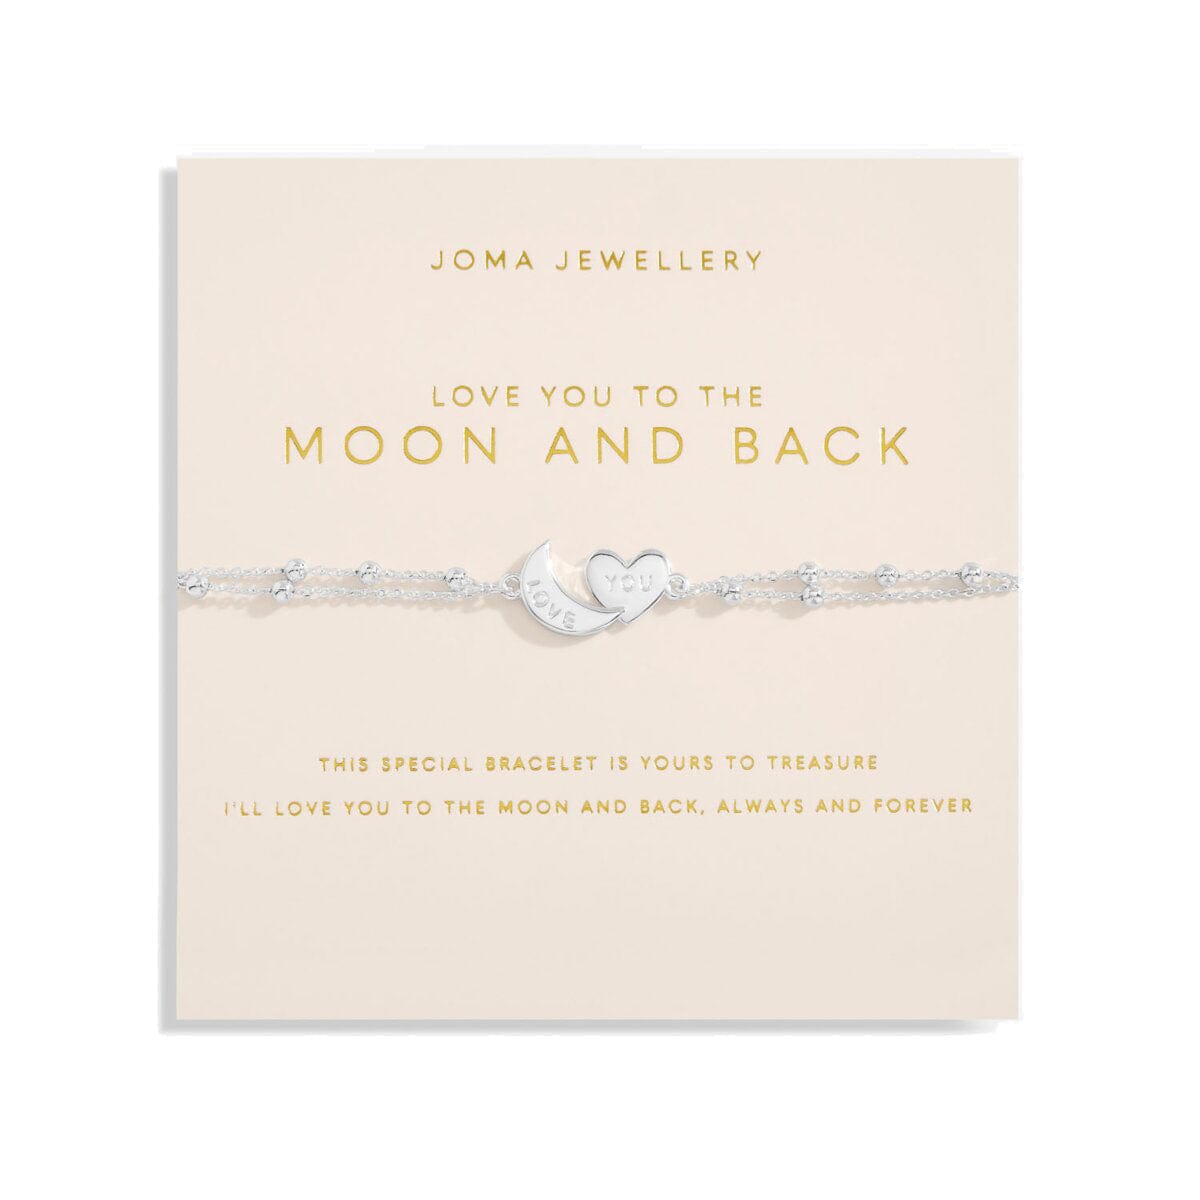 Joma Jewellery Bracelets Joma Jewellery Forever Yours Bracelet - Love You to the Moon and Back